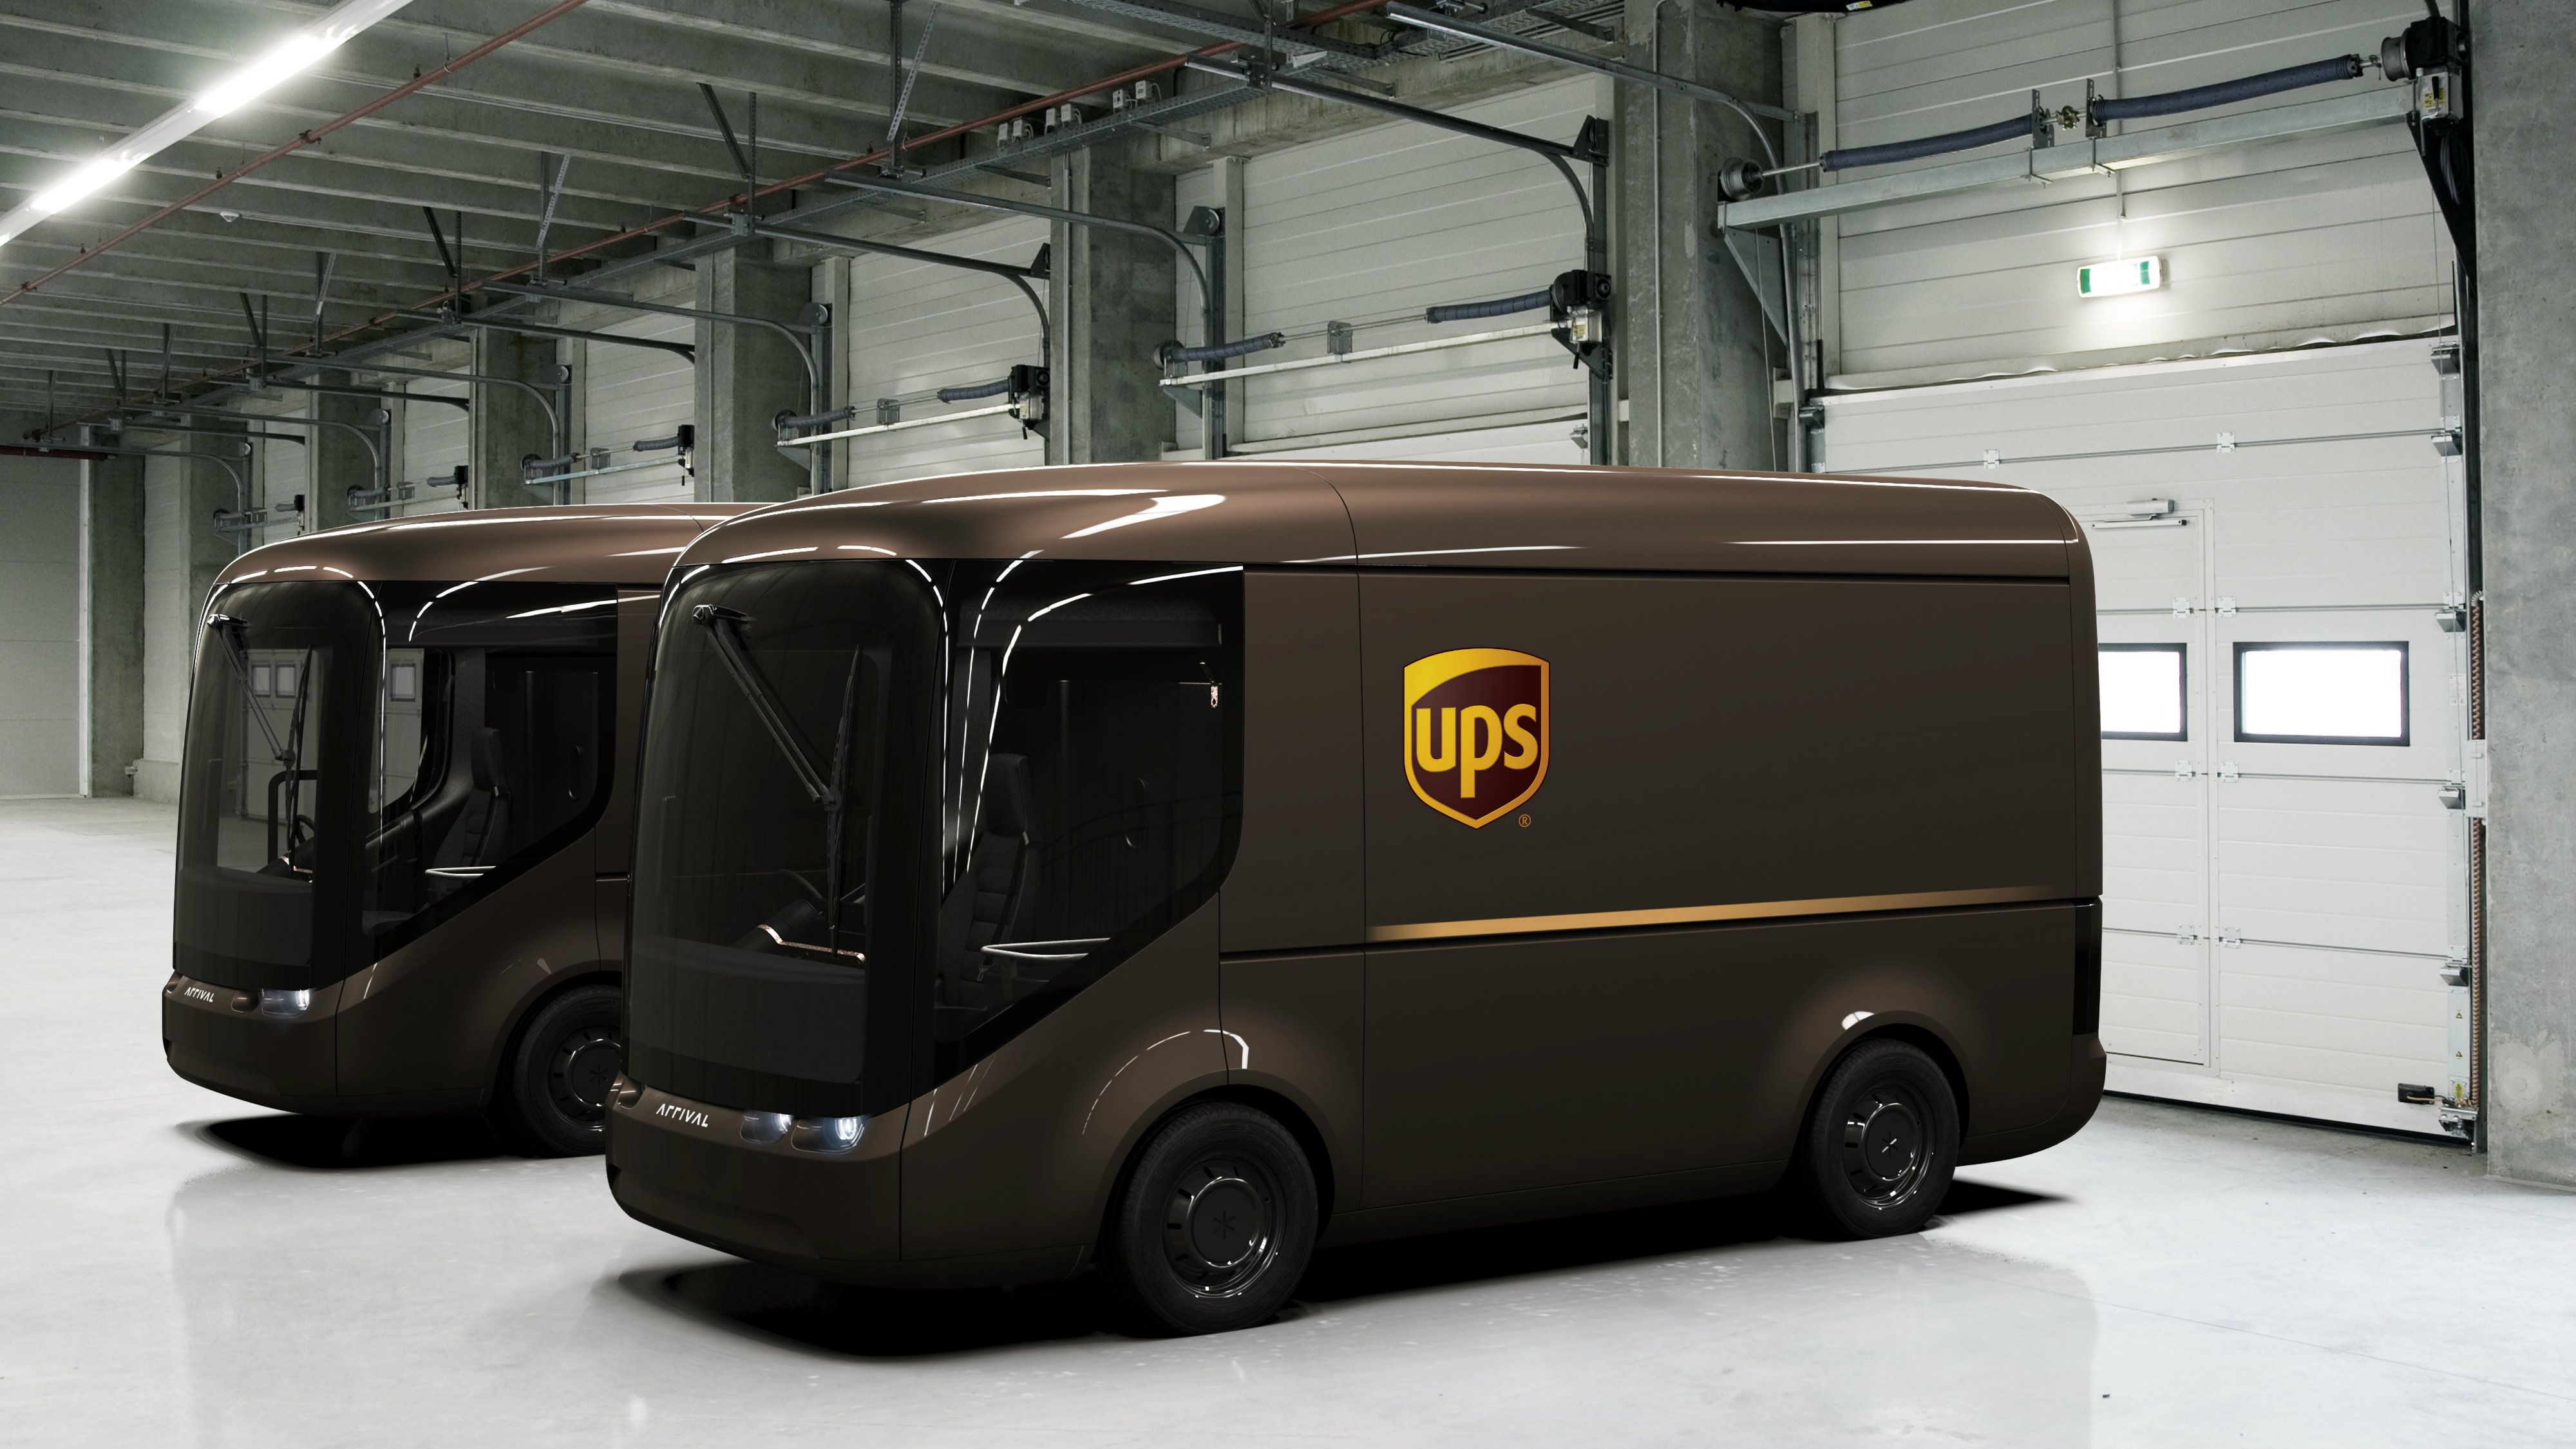 New UPS electric truck design helps driver awareness and safety — Quartz